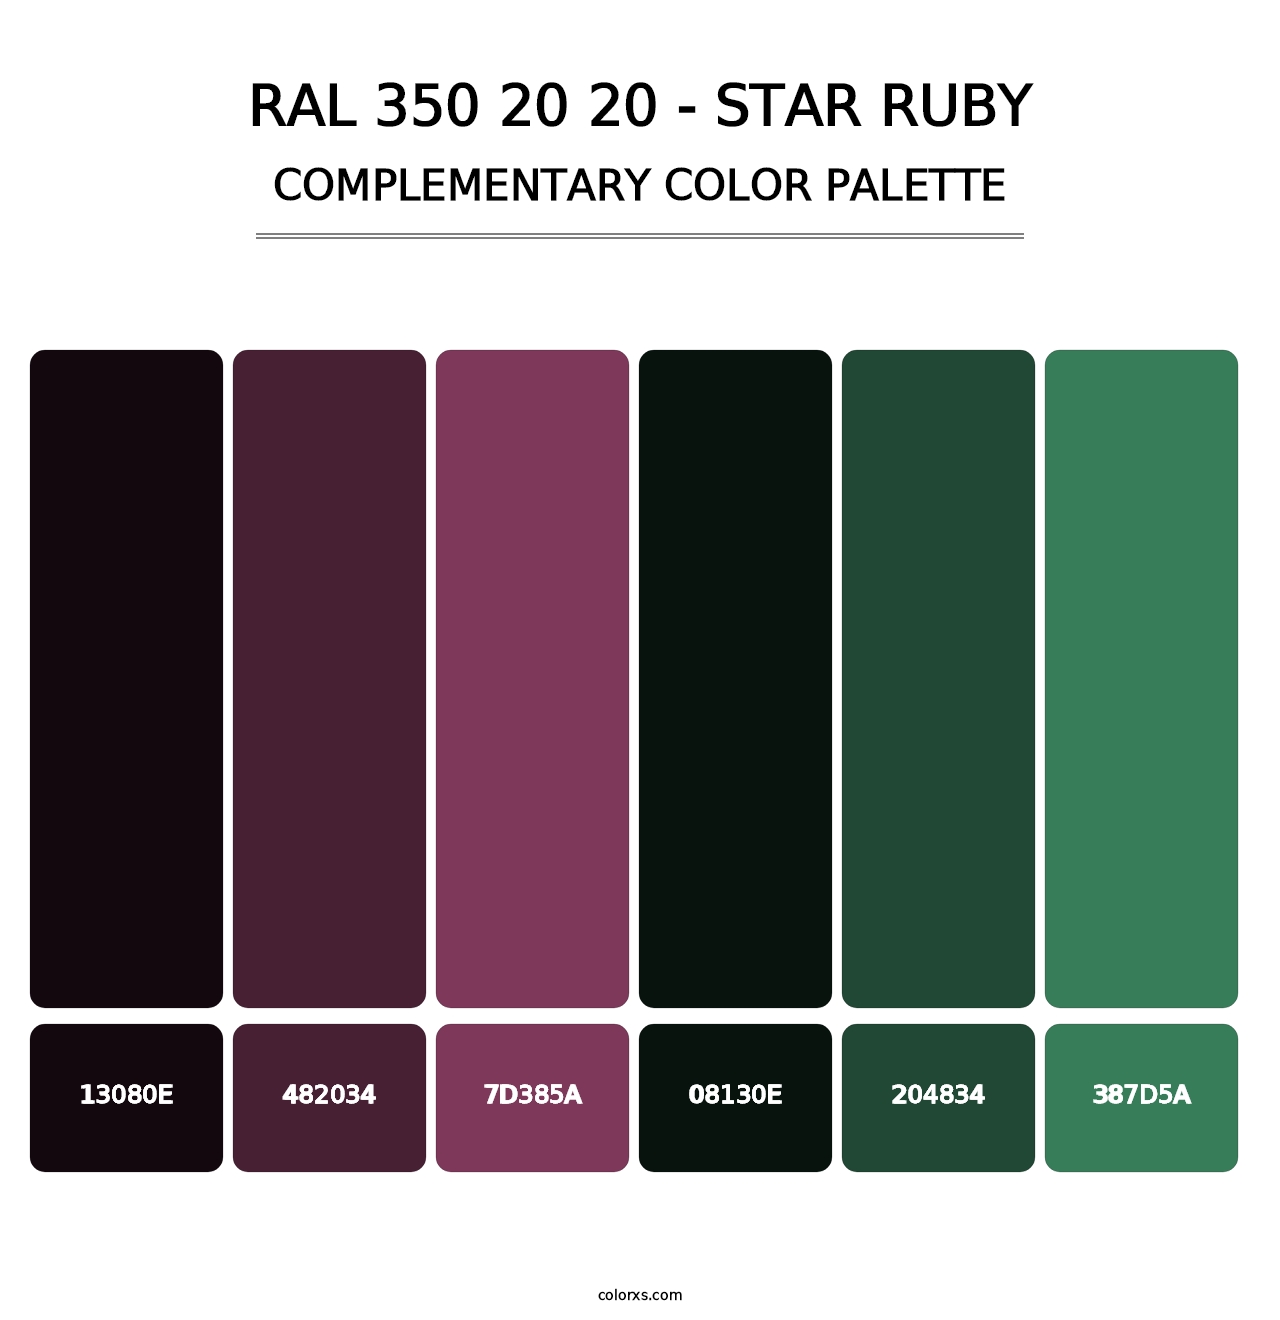 RAL 350 20 20 - Star Ruby - Complementary Color Palette